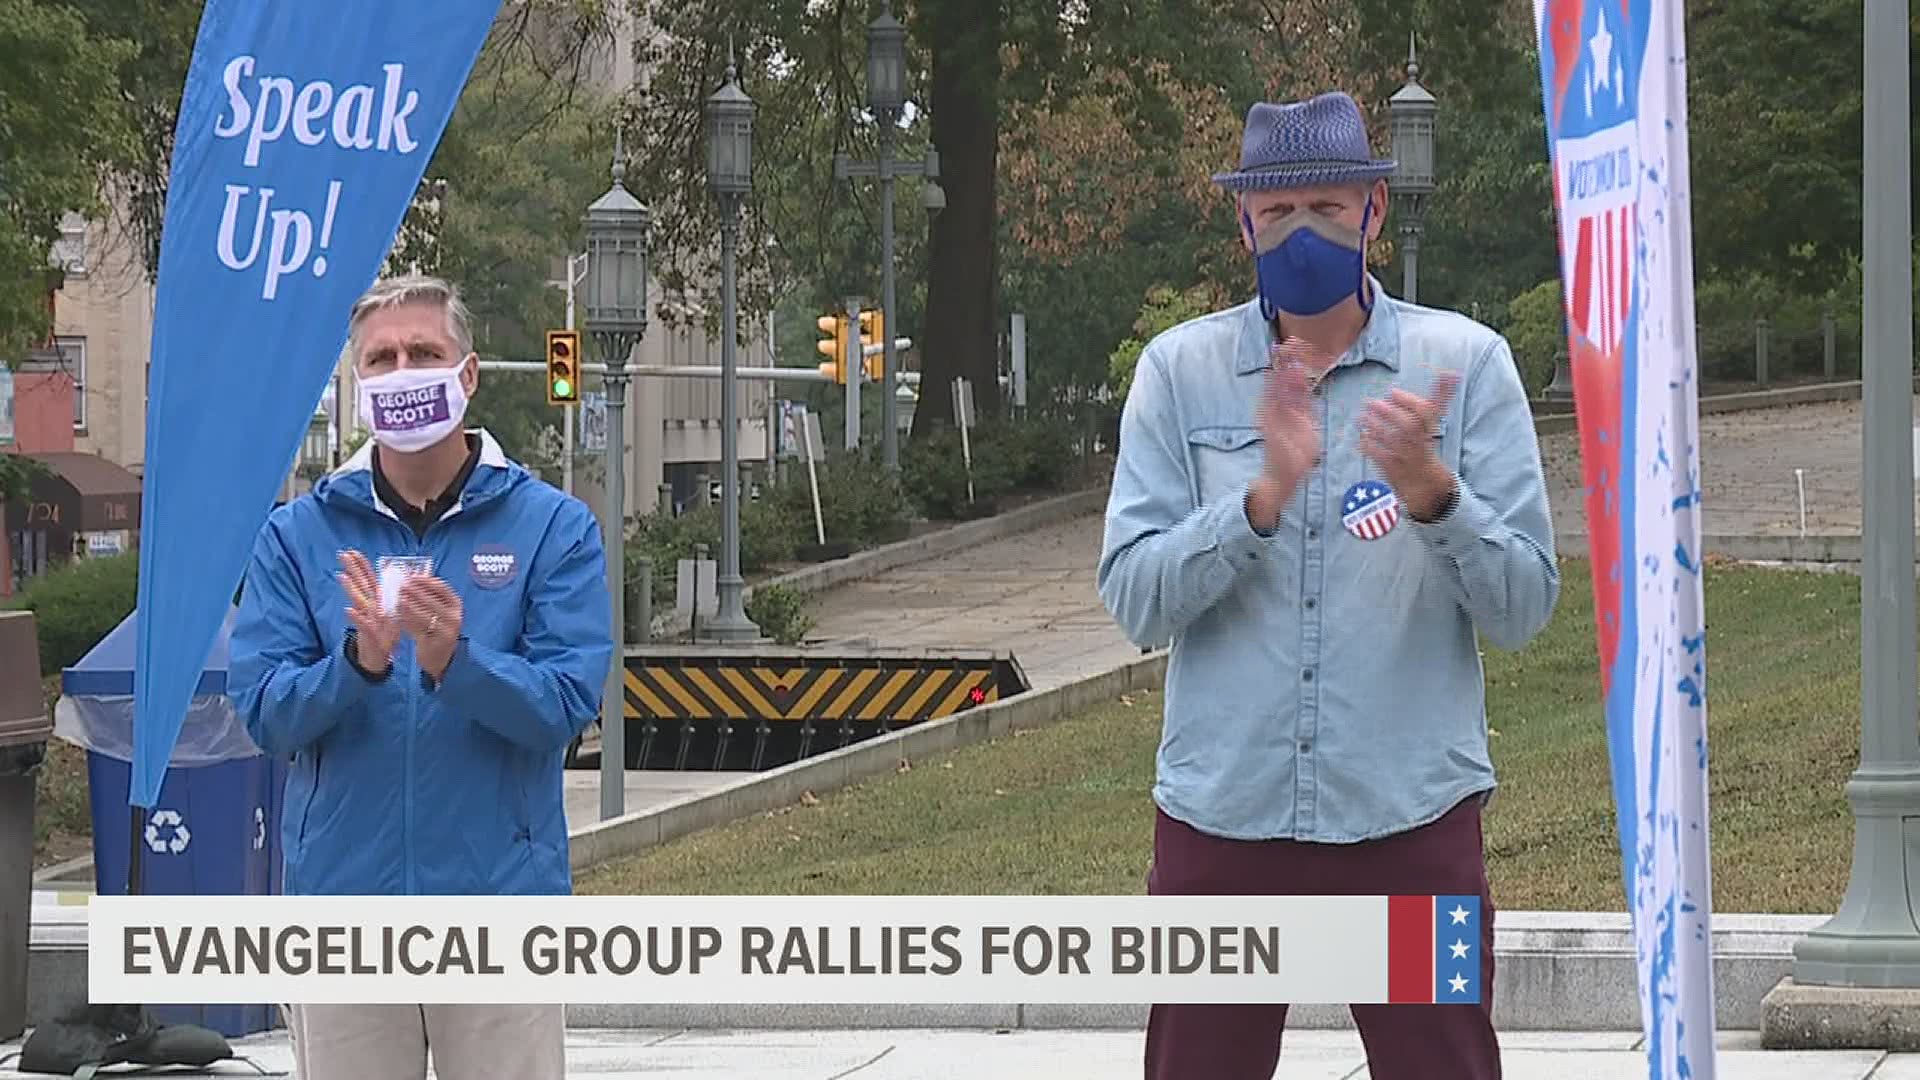 "Vote Common Good" held the rally today at the Capitol in hopes to convince the religious voters to vote for Biden.